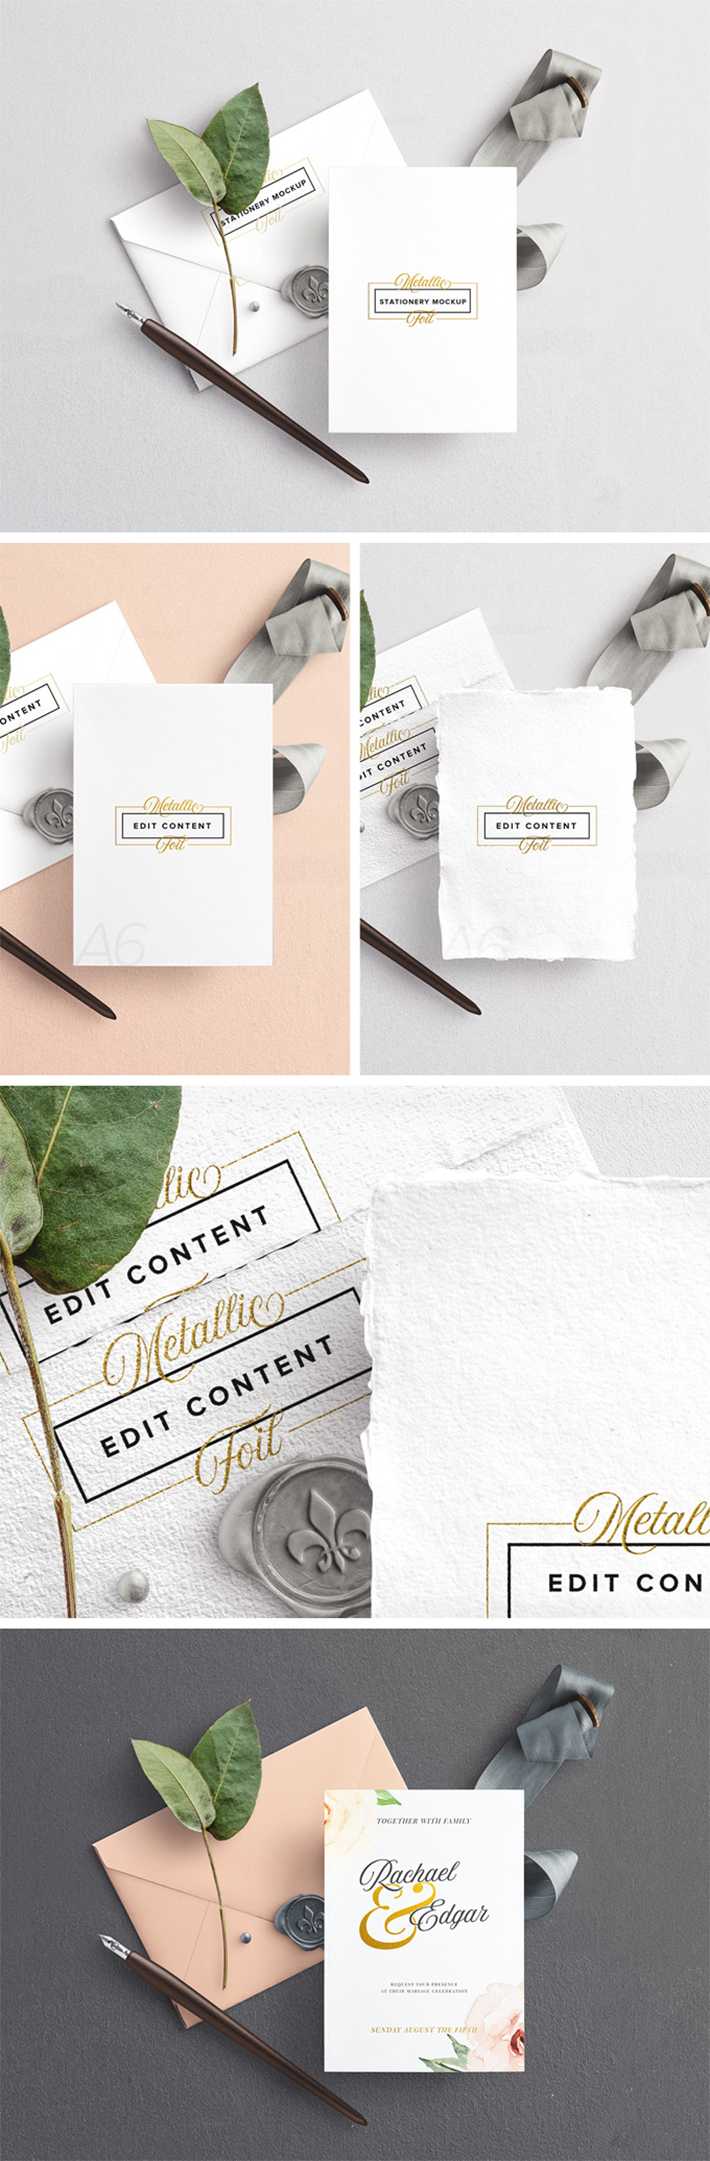 Free Download Awesome Wedding Stationery Mockup (2019)